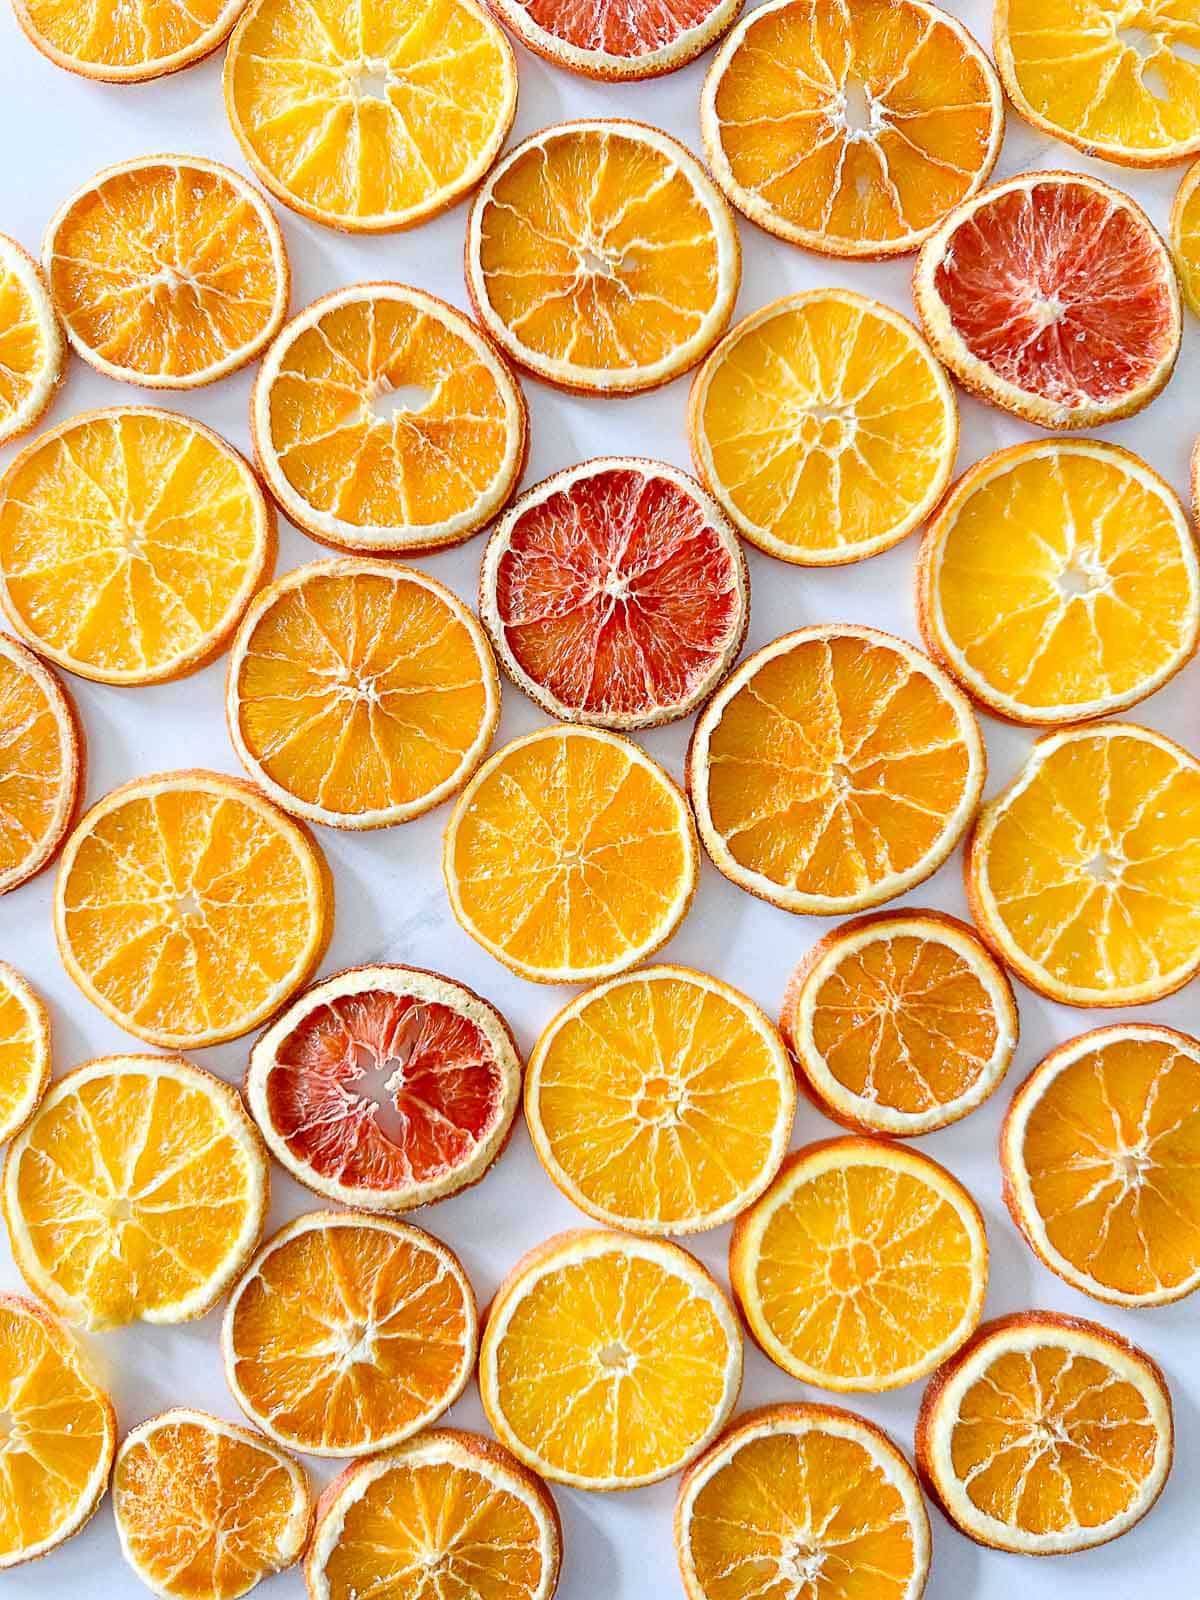 The best Way To Dry Oranges So They Stay Vibrant